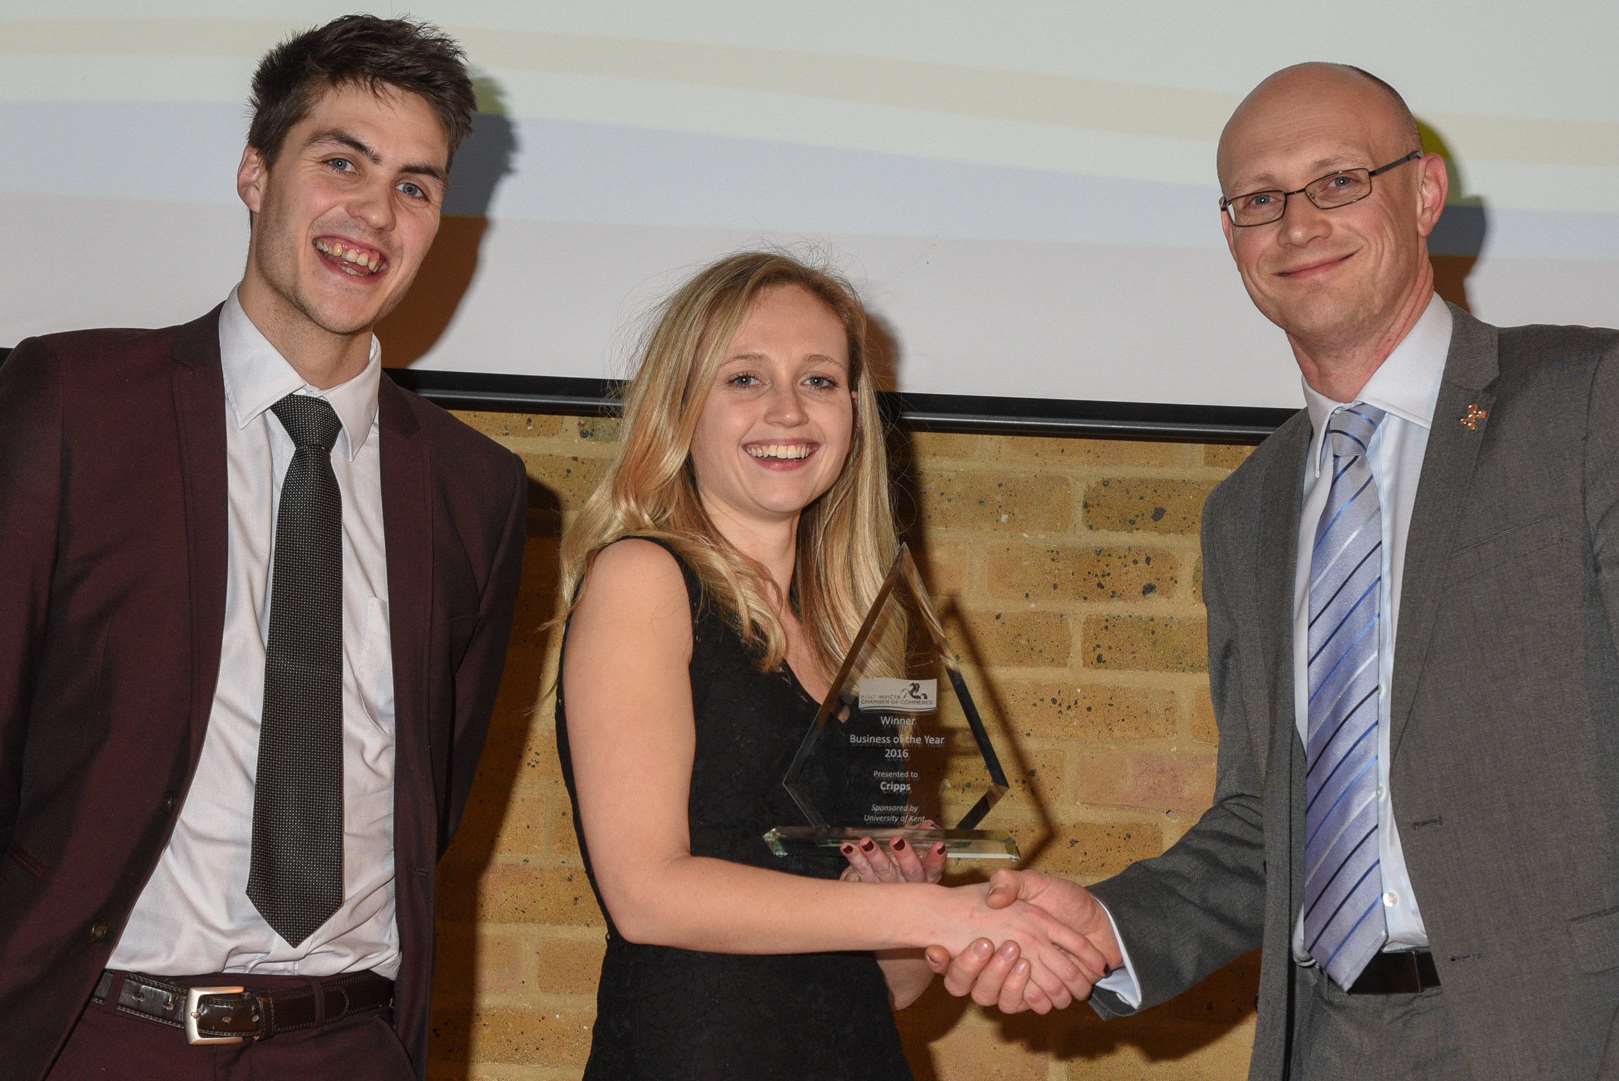 Cripps was named Business of the Year at the Kent Invicta Chamber Annual Business Awards